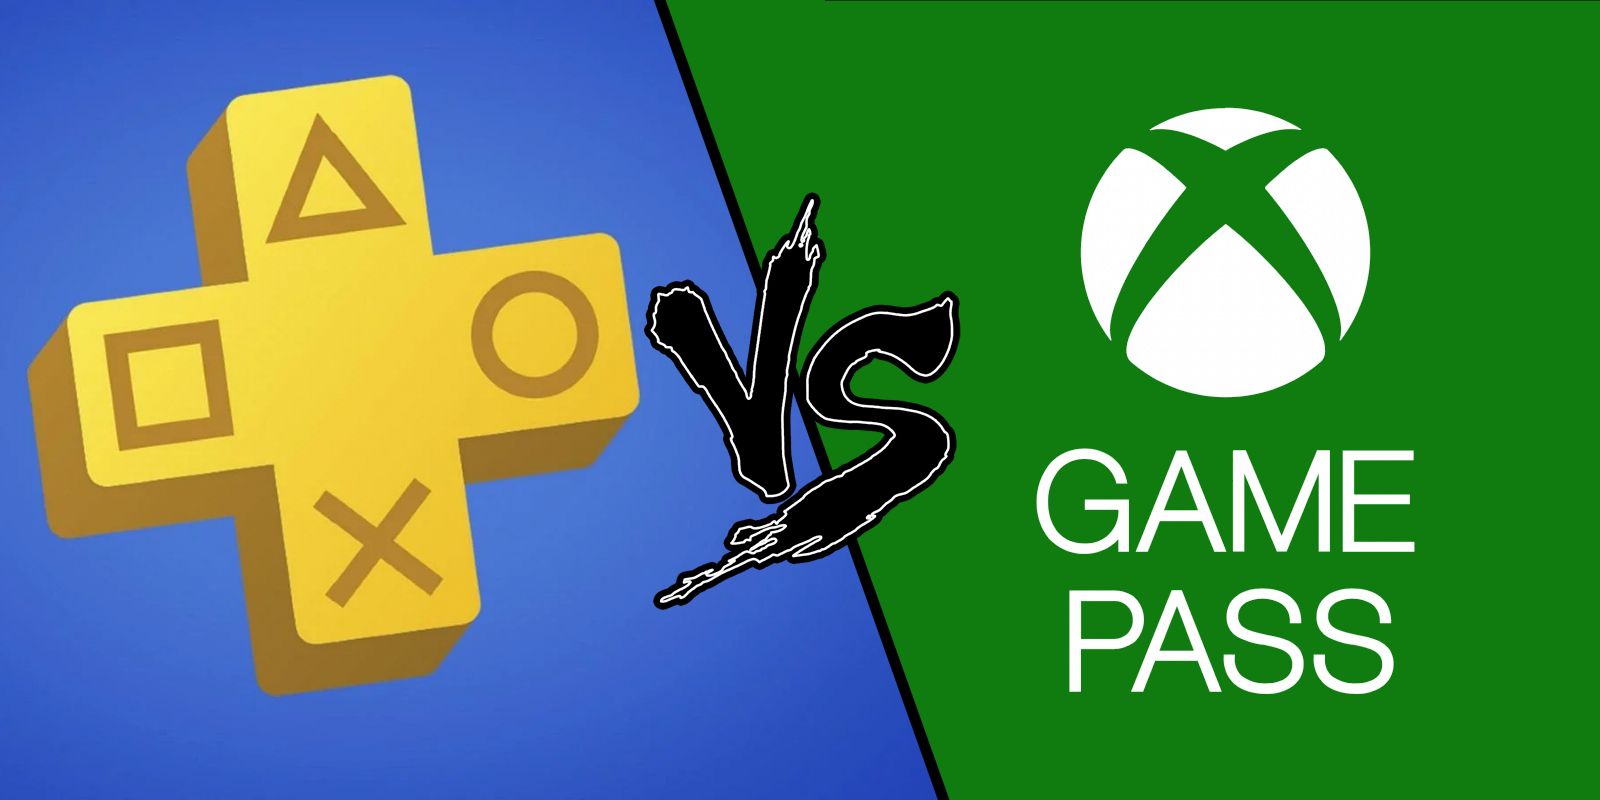 Price and features comparison between the new PlayStation Plus and Xbox Game Pass